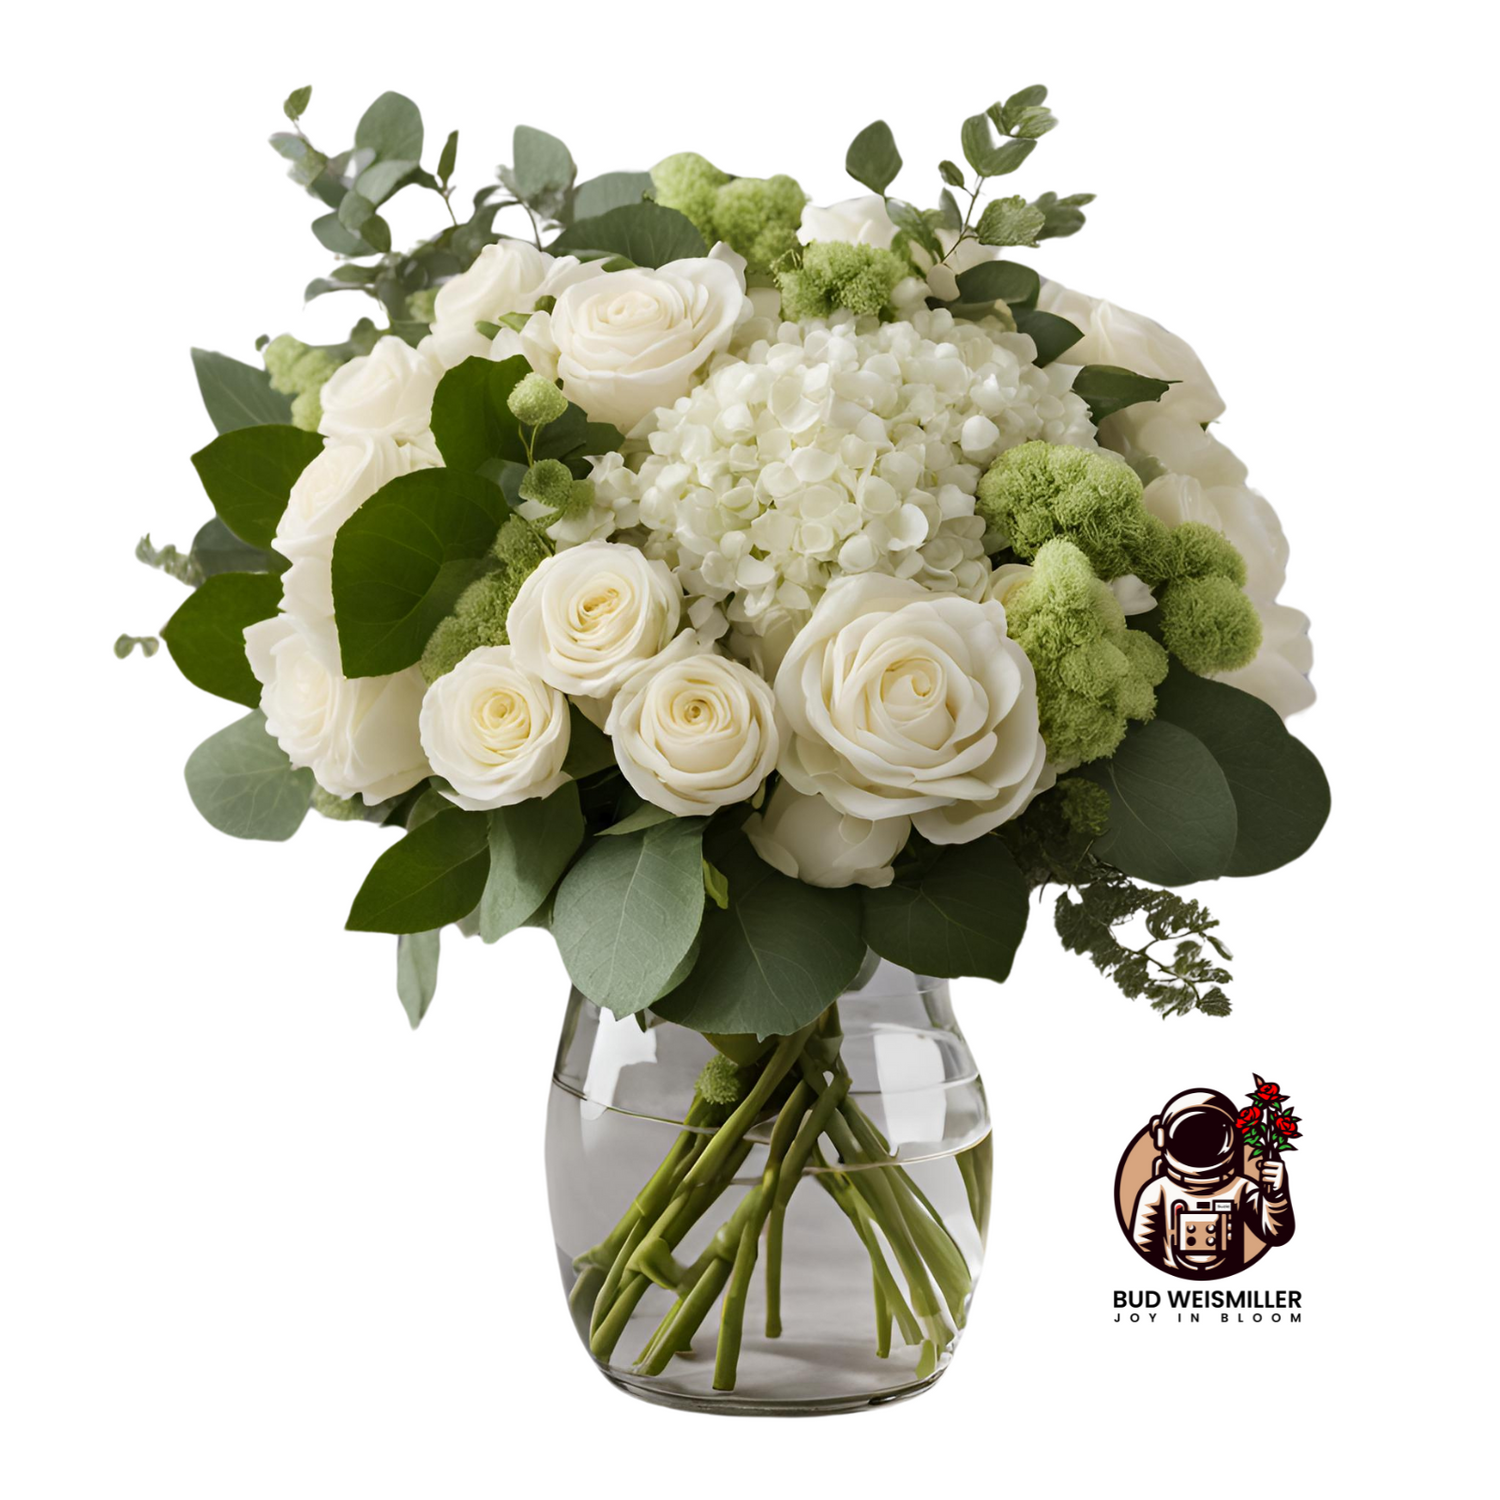 A beautful sympathy fresh flower arrangement with spray roses, hydrangea, lush greenery, and filler flowers.